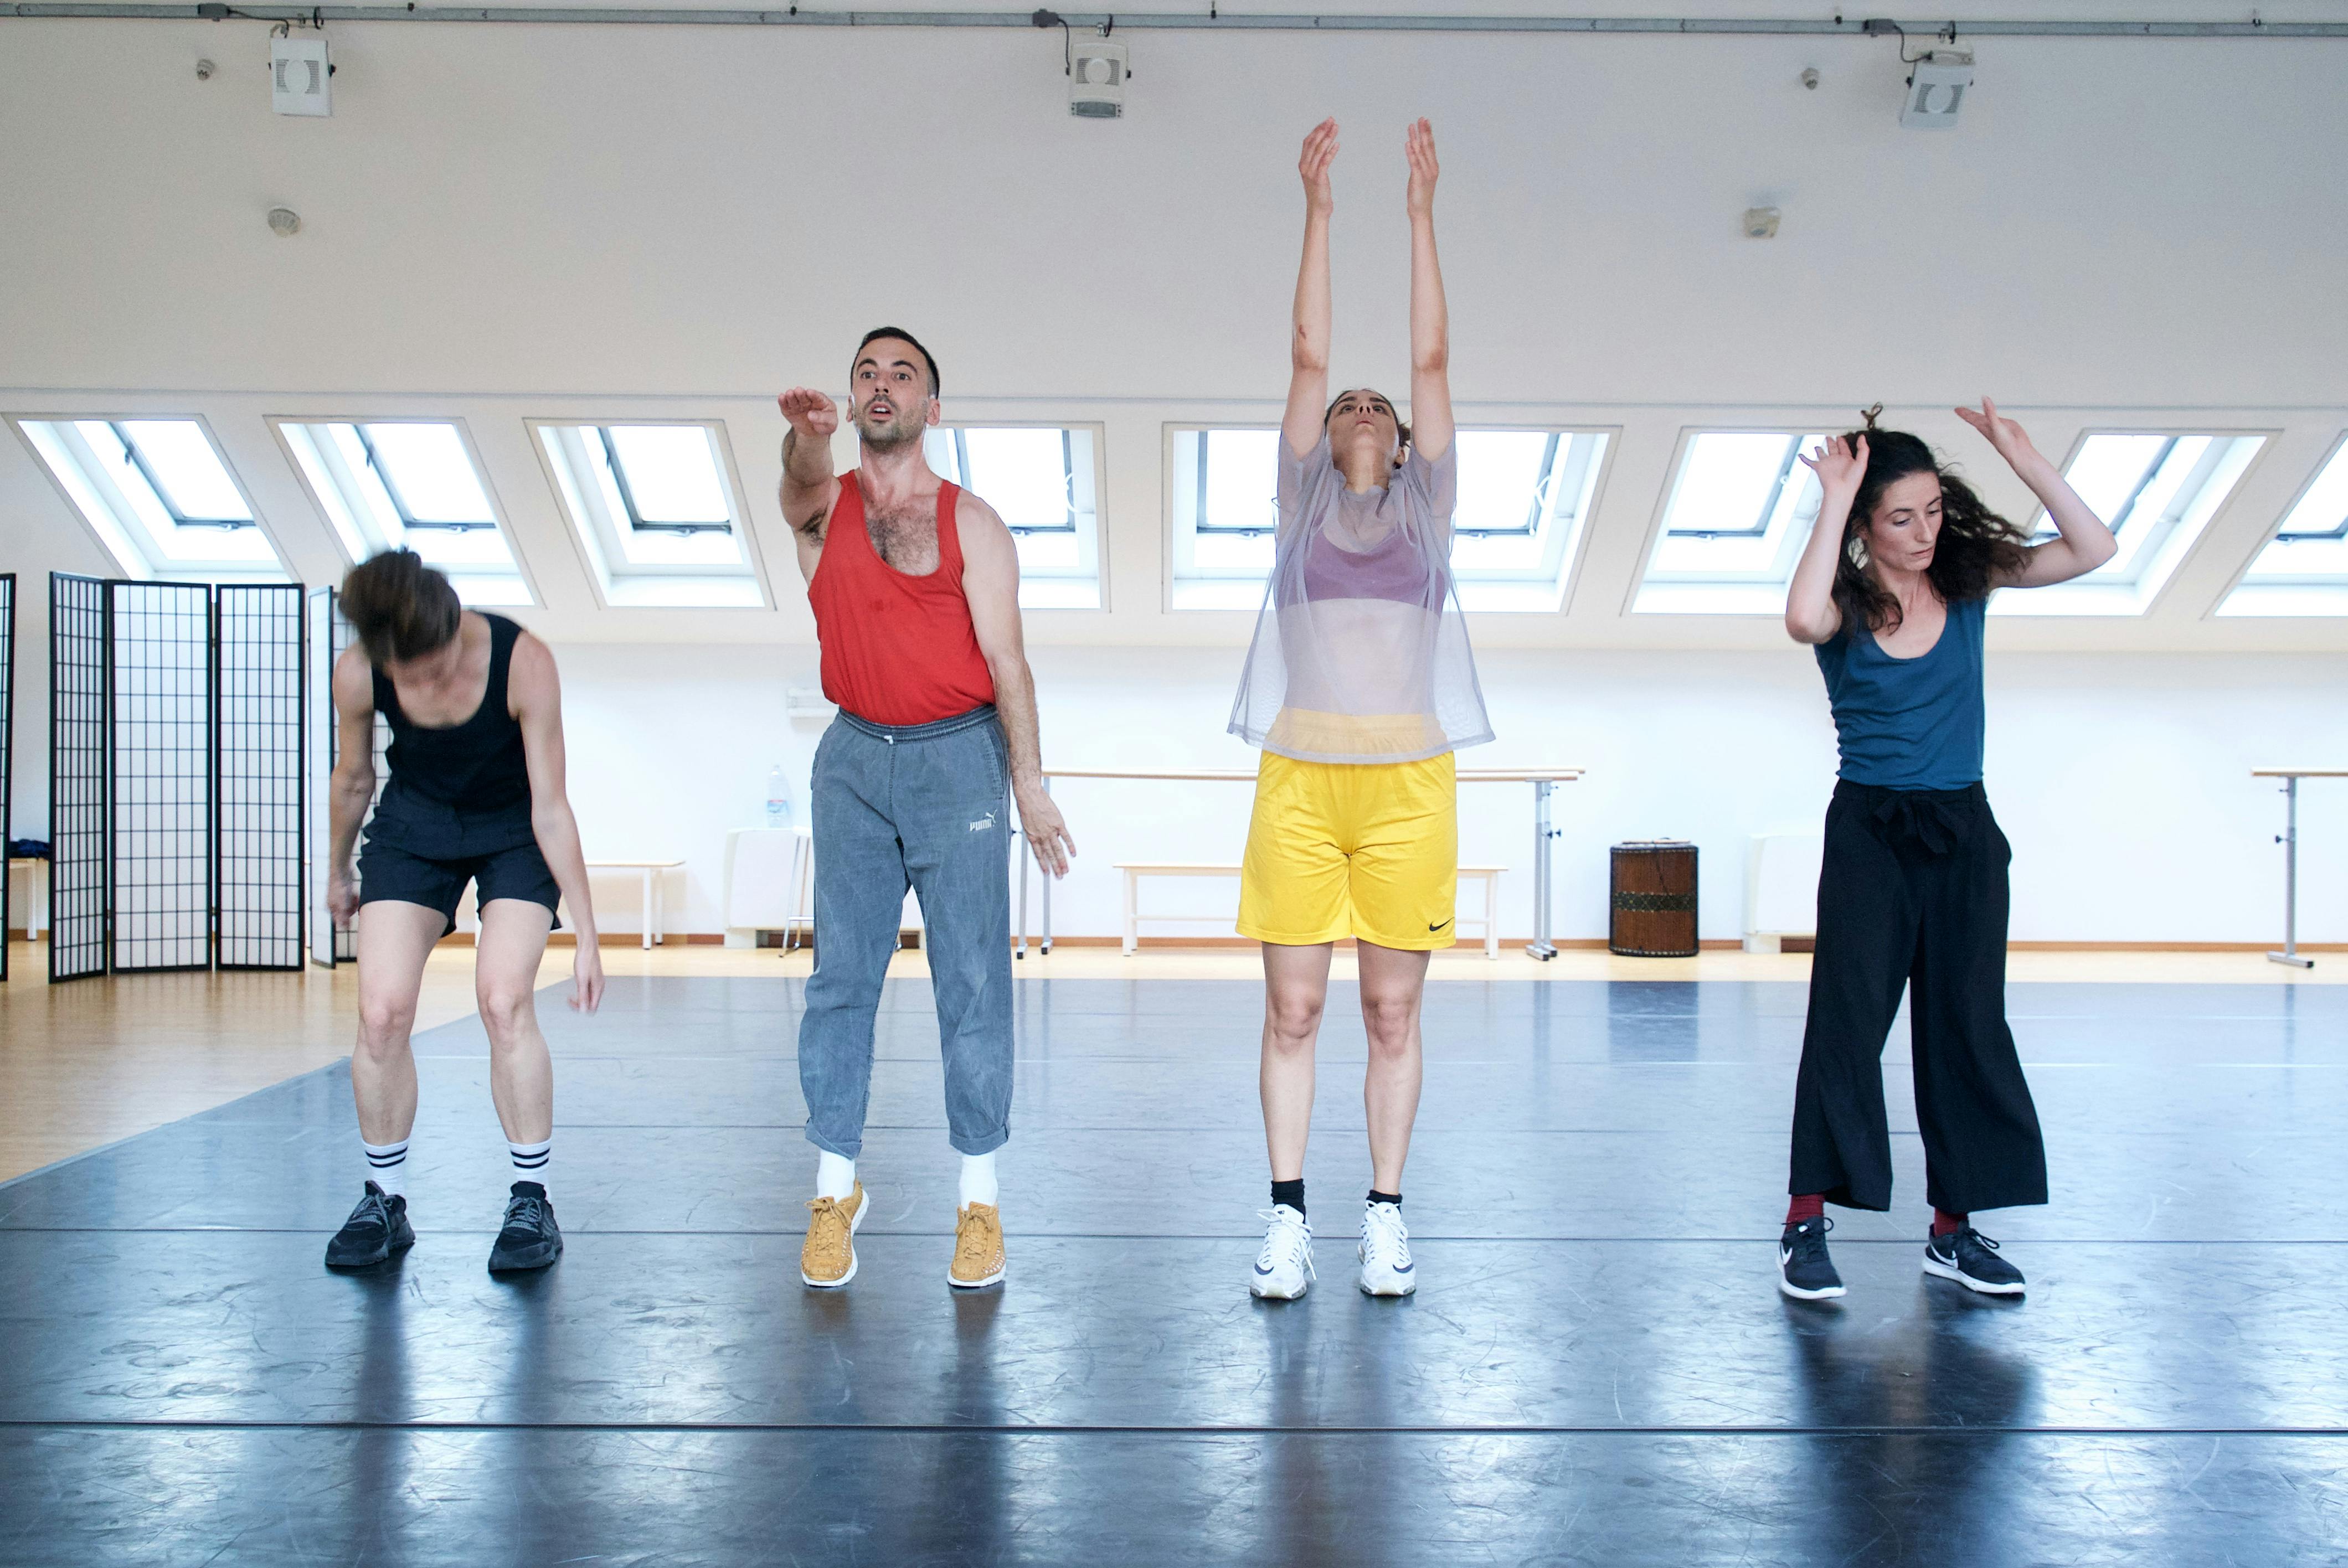 Four performers in a horizontal row in the Studio make different movements with their arms